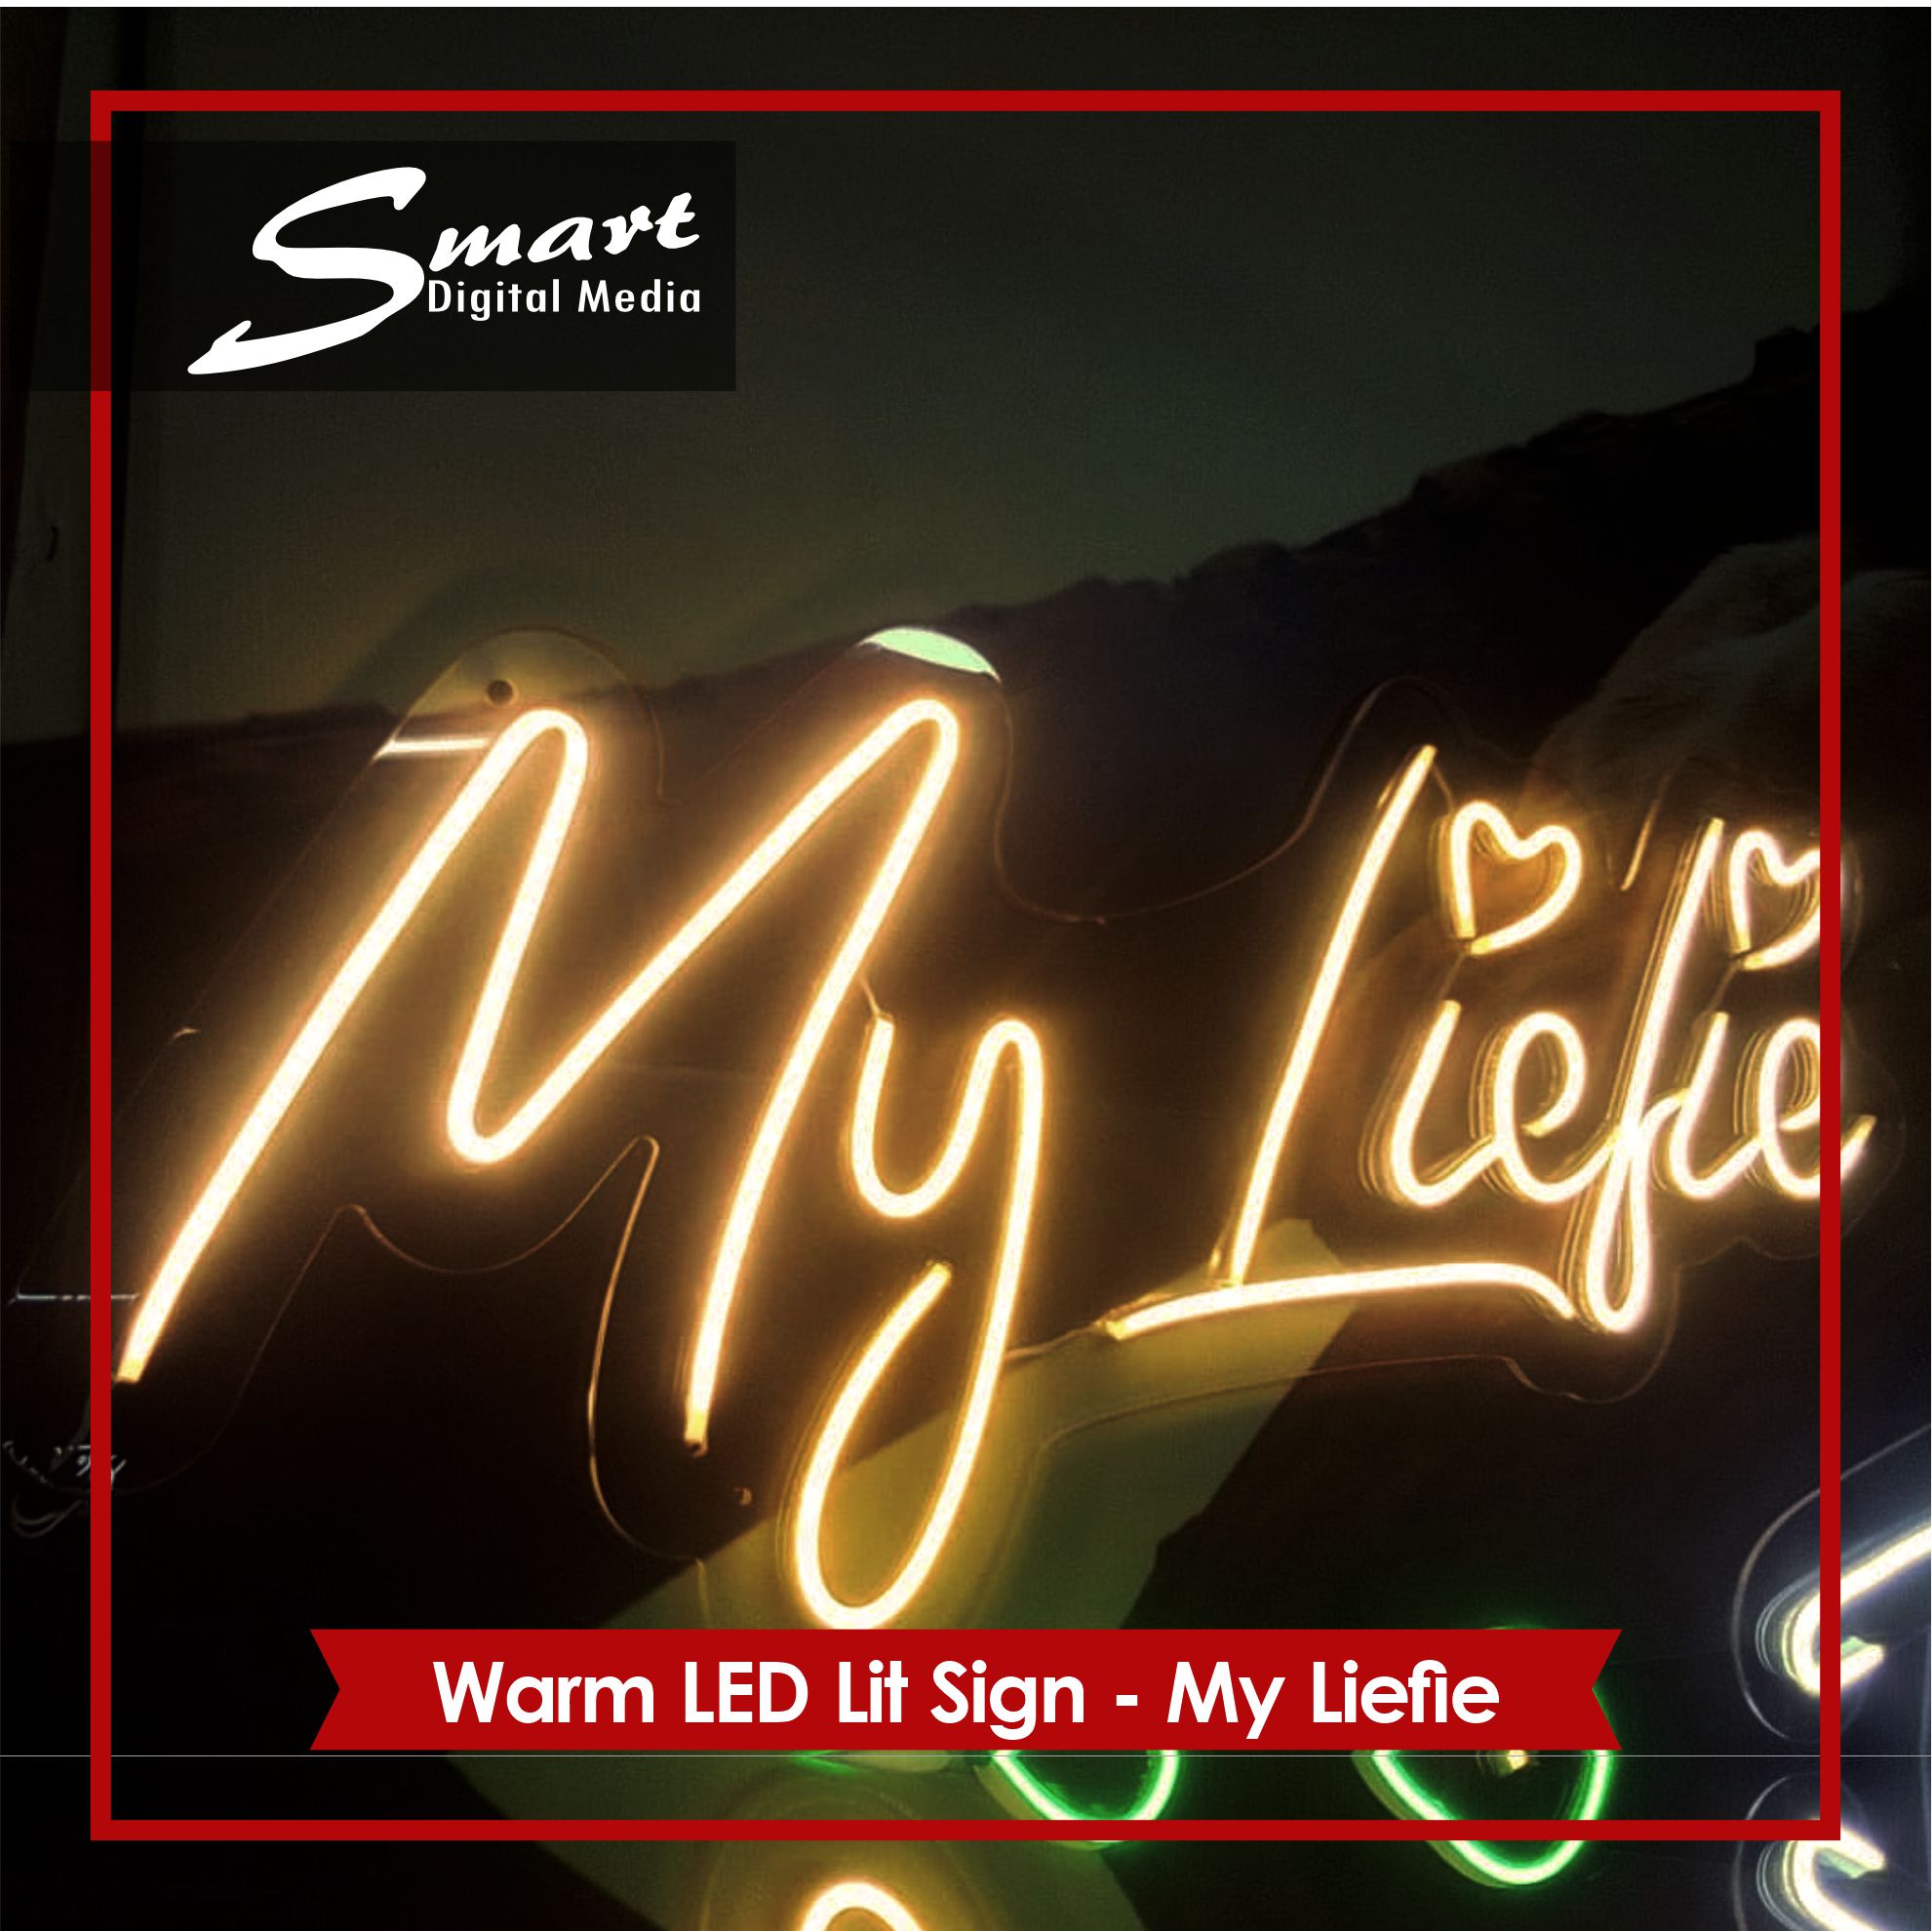 My Liefie translated means My Love, not so newlyweds ordered this warm white LED Light, custom made by Smart Digital Media made this from energy-saving and safe neon flex tubing.